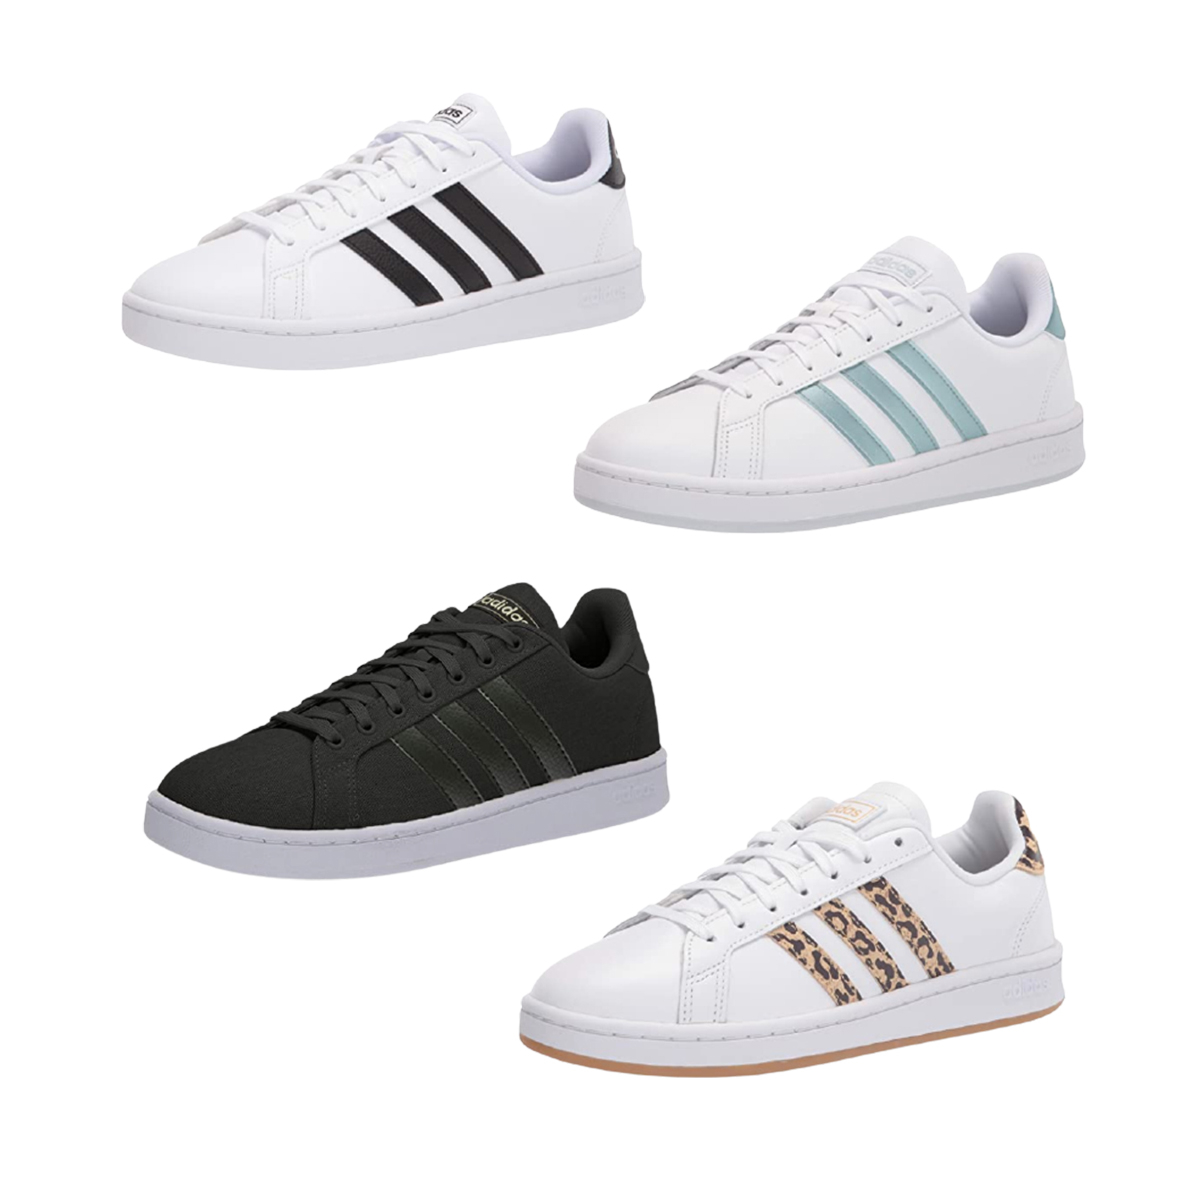 Bestselling Sneakers for $37? Shop This Amazon Sale Now! - E! Online